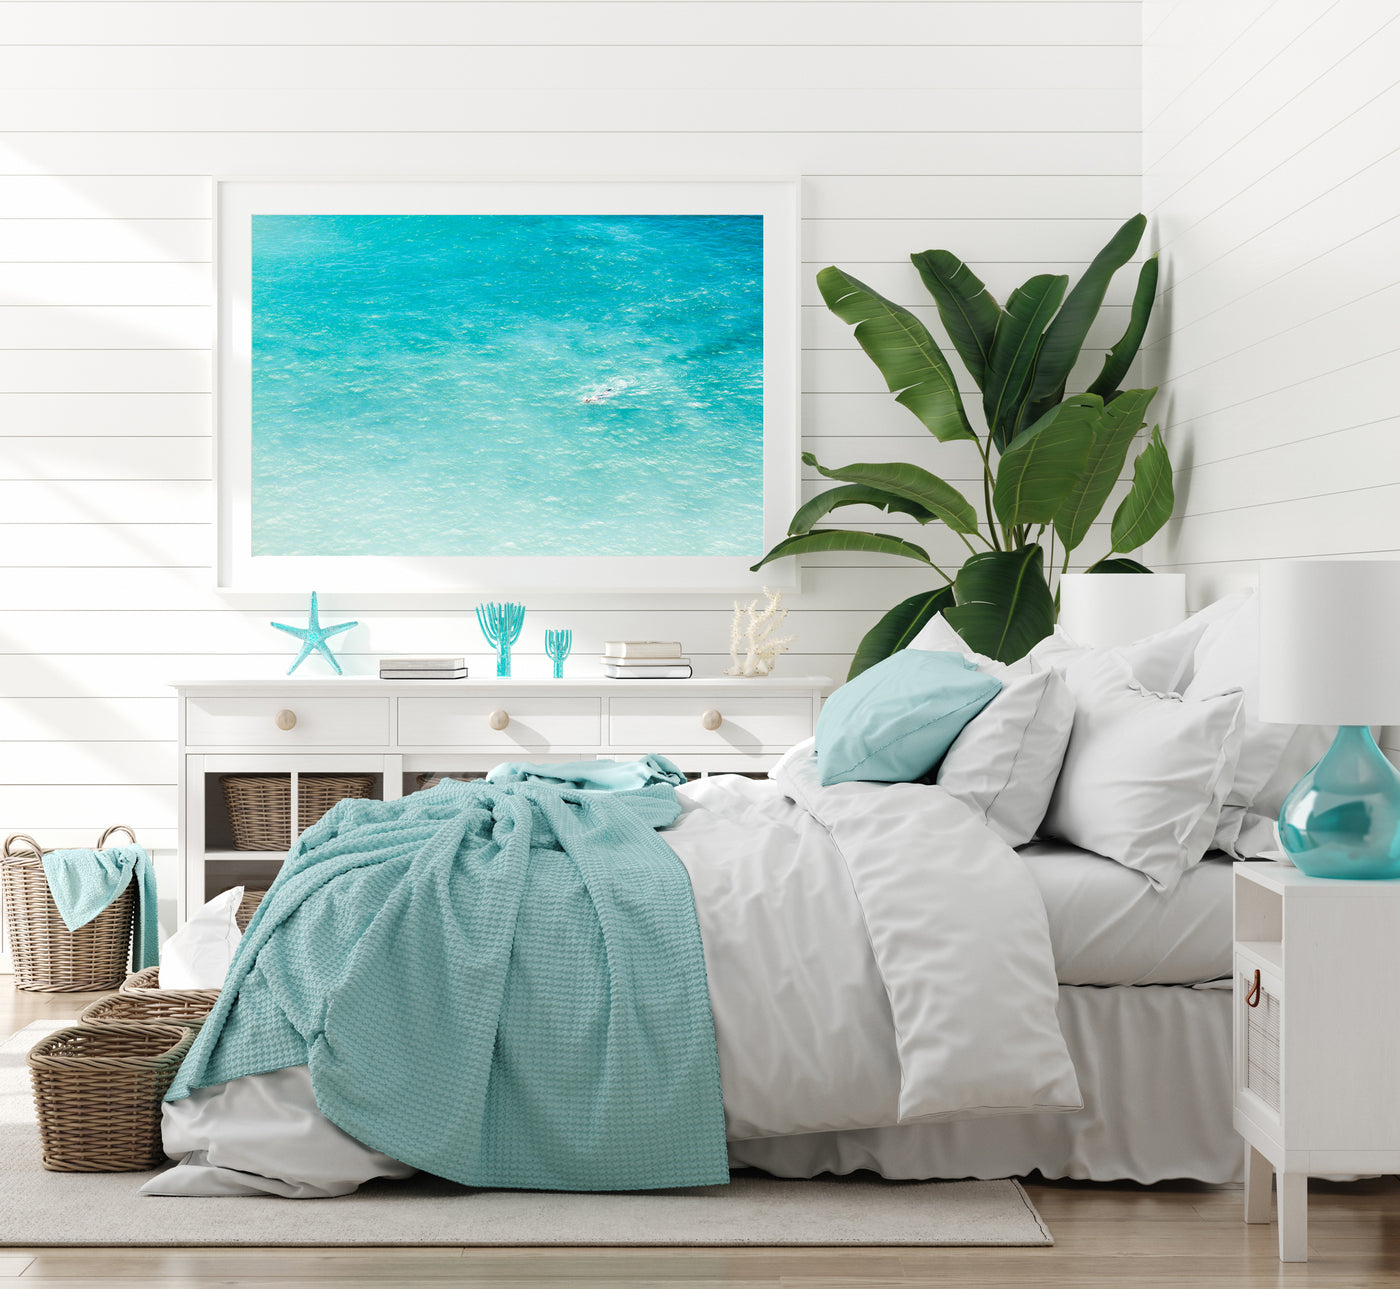 Magoito - Turquoise water fine art print by Cattie Coyle Photography in bedroom